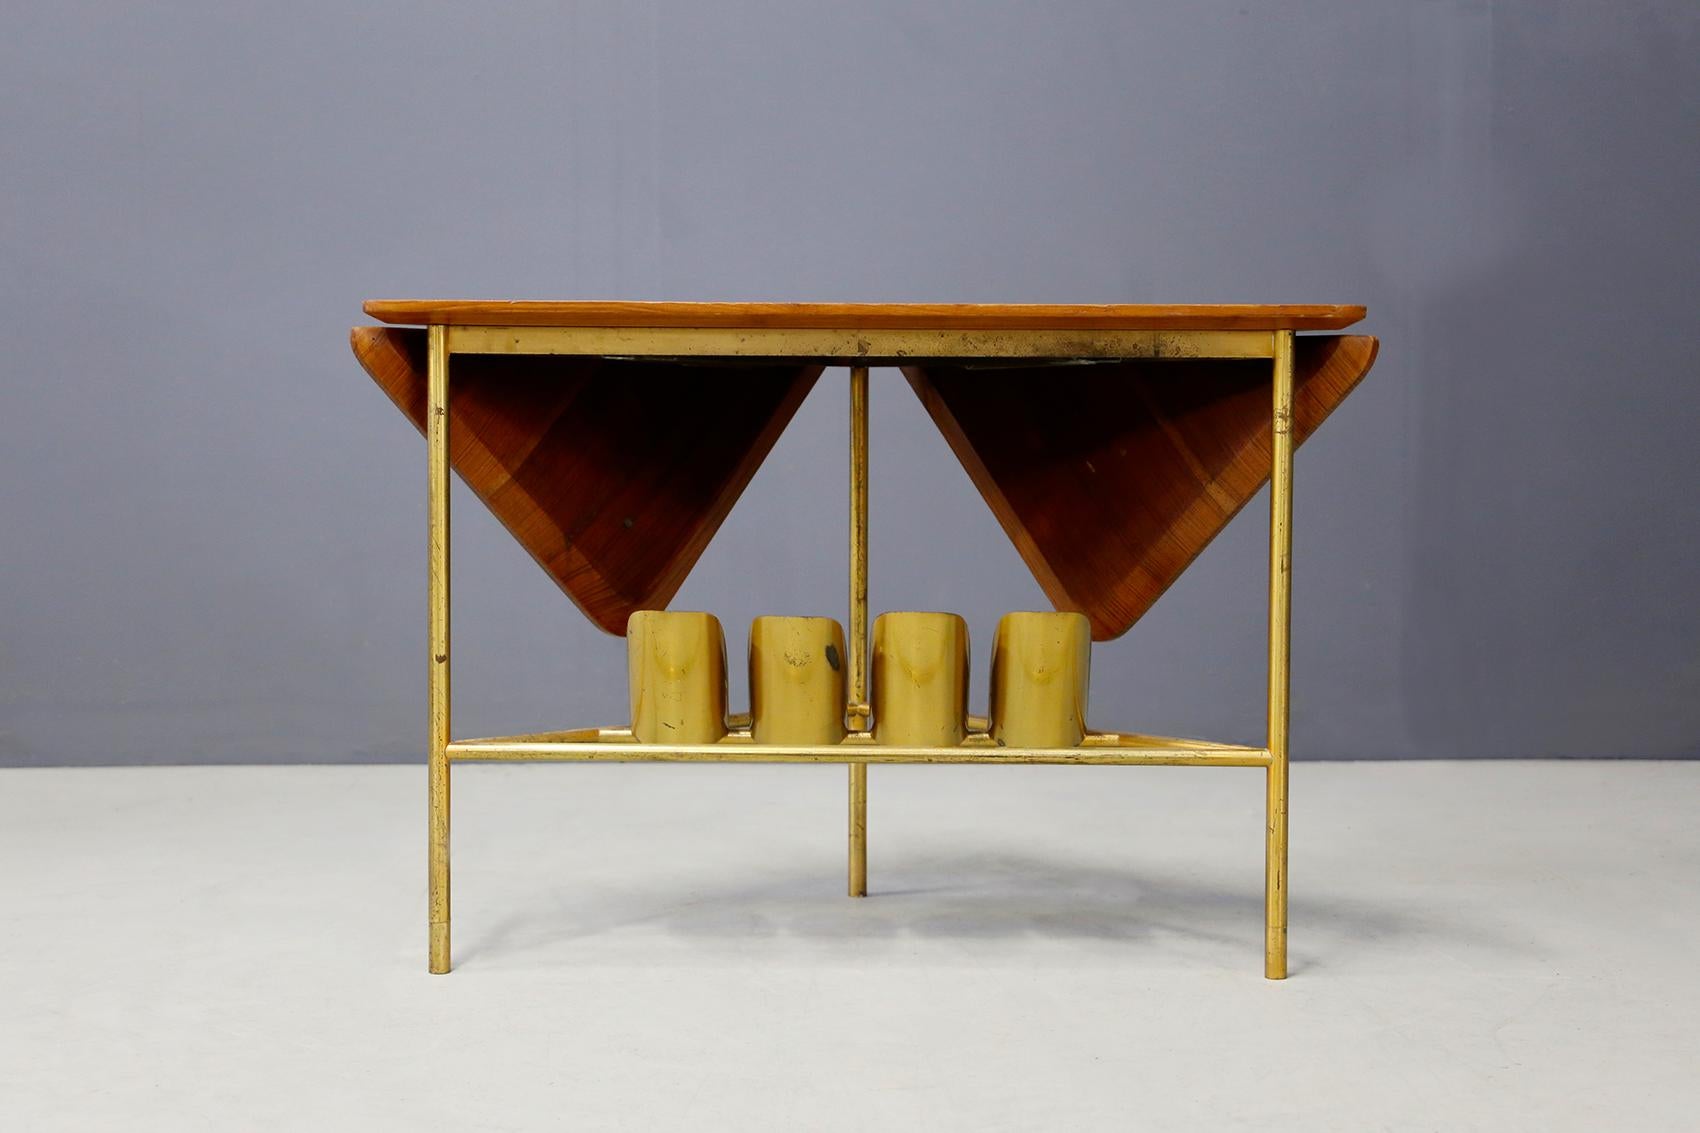 Folding coffee table attributed to Ignazio Gardella from 1950. The coffee table is made of brass for its structure and wooden shelves. The peculiarity of the cabinet is in its brass bottle holders placed in the lower compartment. Its wooden shelf is